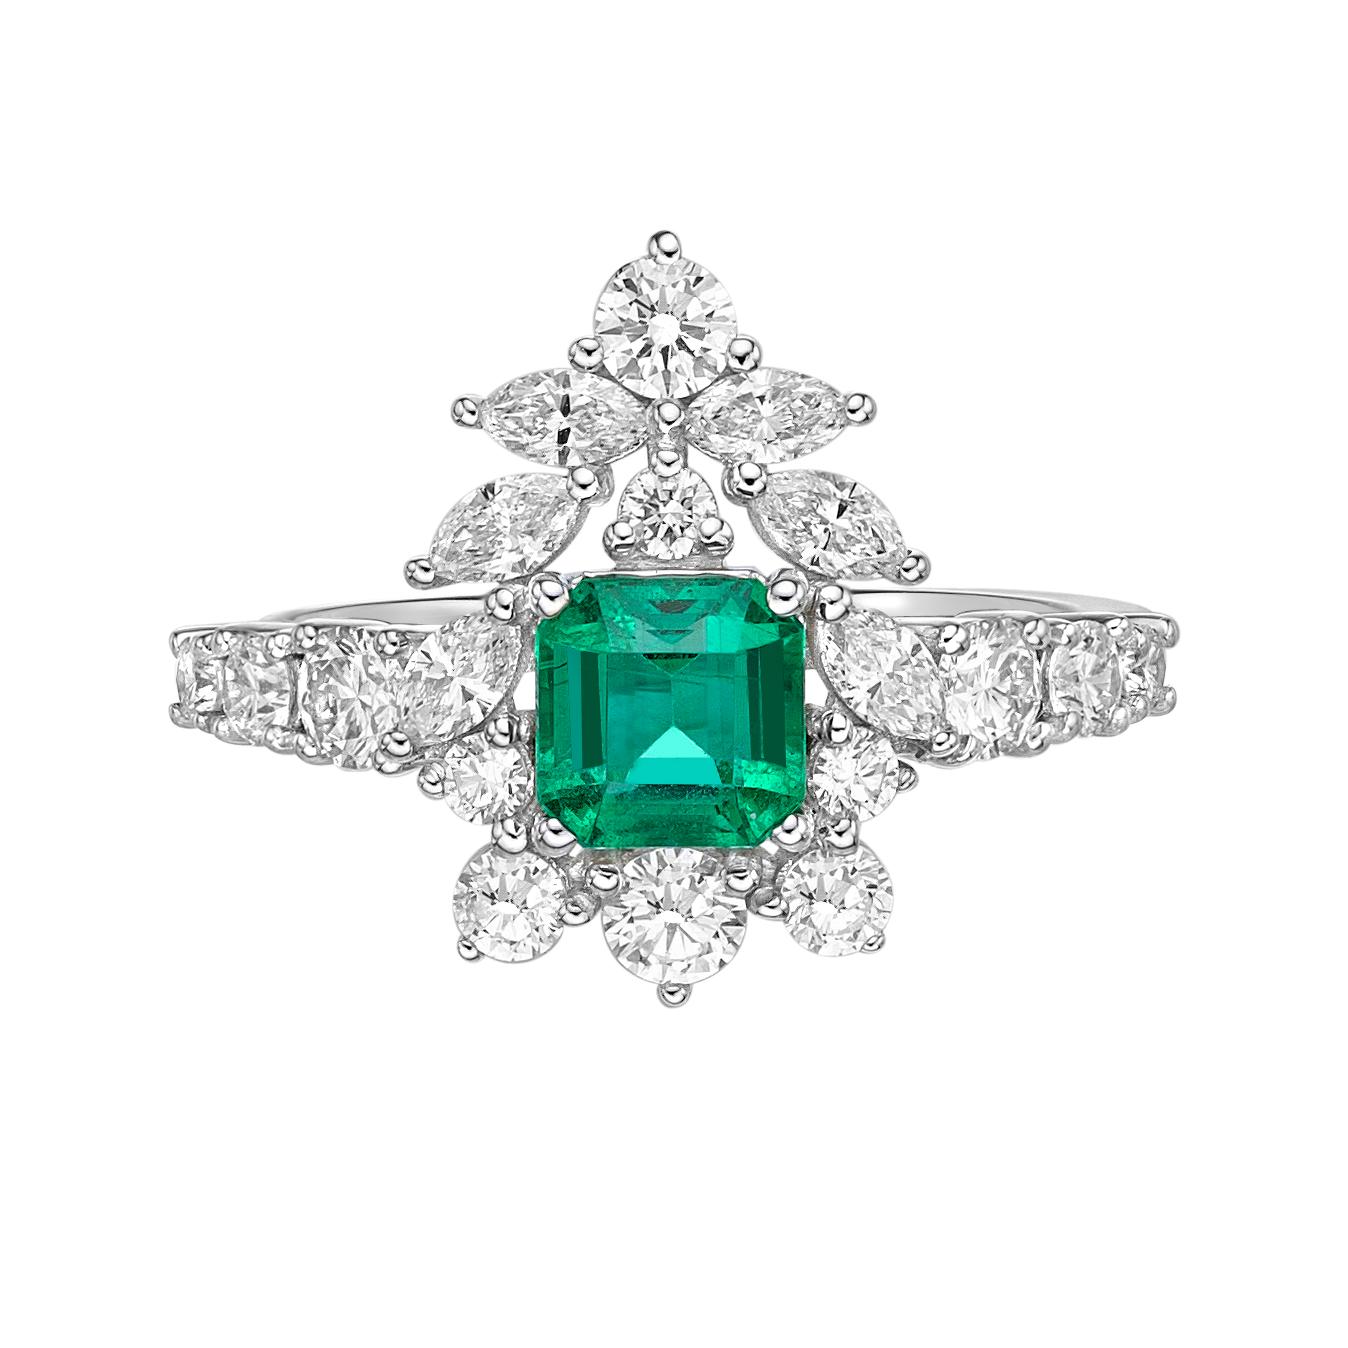 Contemporary 0.9 Carat Emerald and Diamond Ring in 18 Karat White Gold For Sale